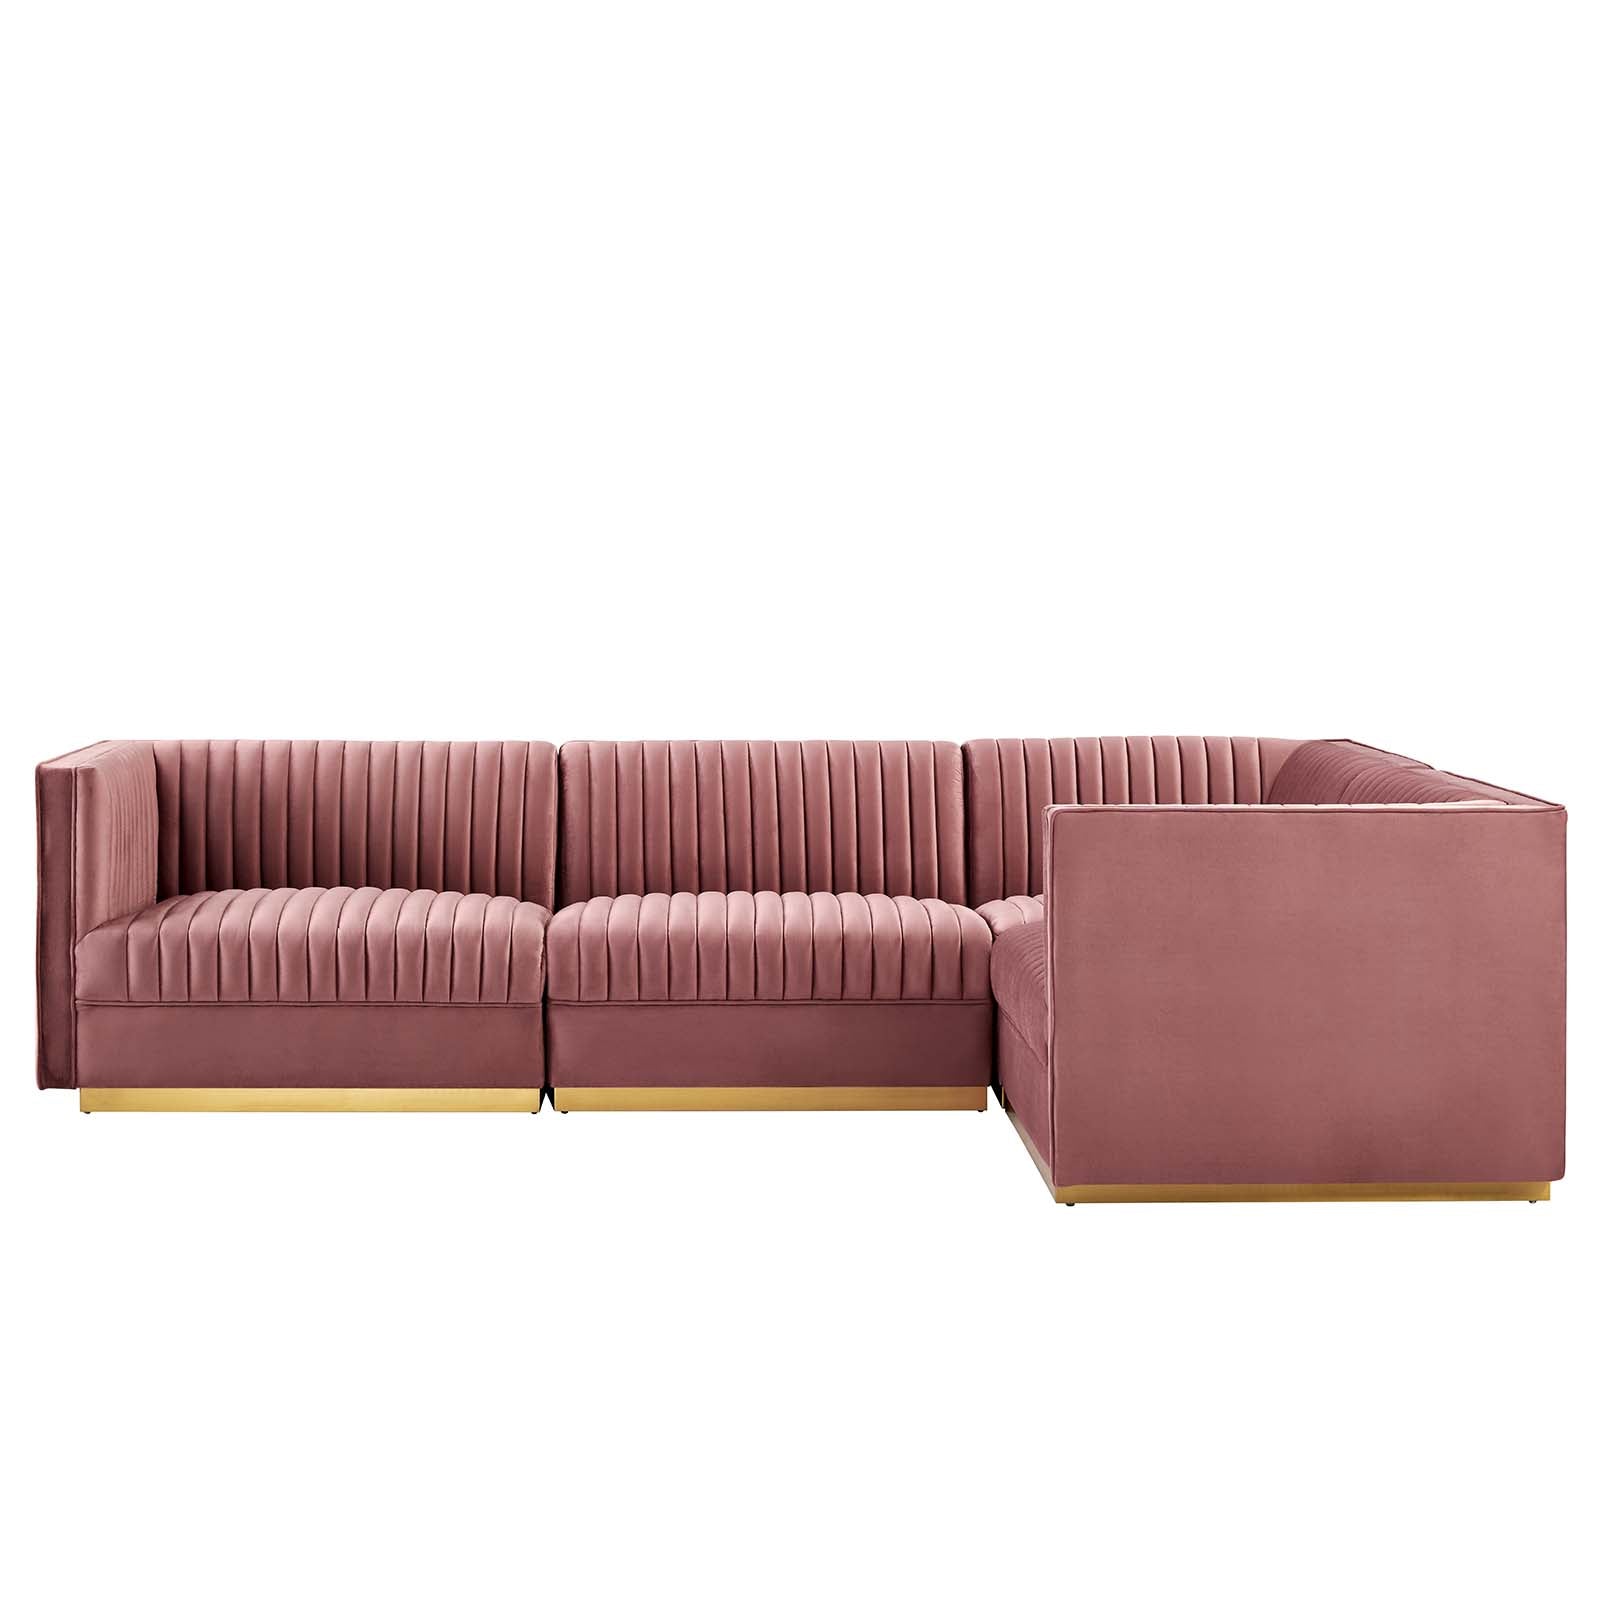 Modway Sectional Sofas - Sanguine Channel Tufted Performance Velvet 4 Piece Right-Facing Modular Sectional Sofa Dusty Rose